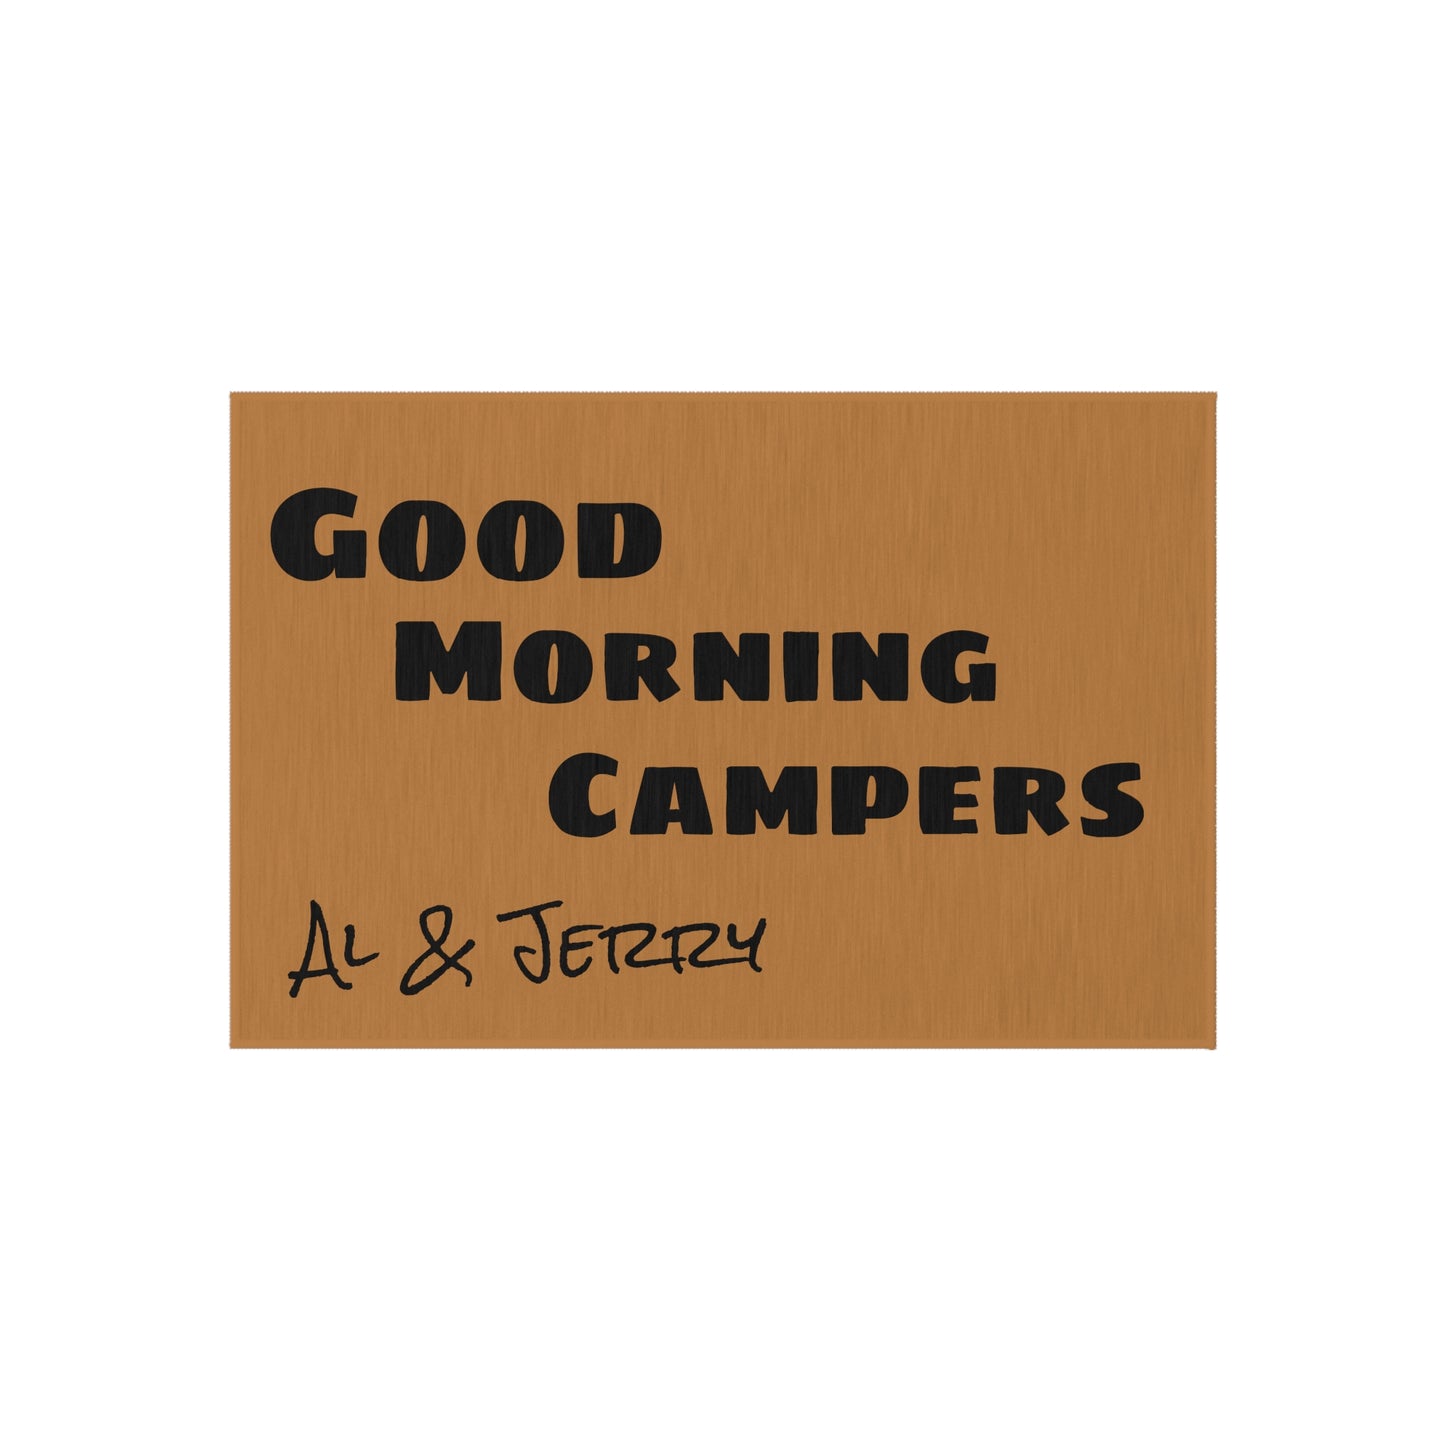 Al & Jerry "Good morning campers" Outdoor Rug